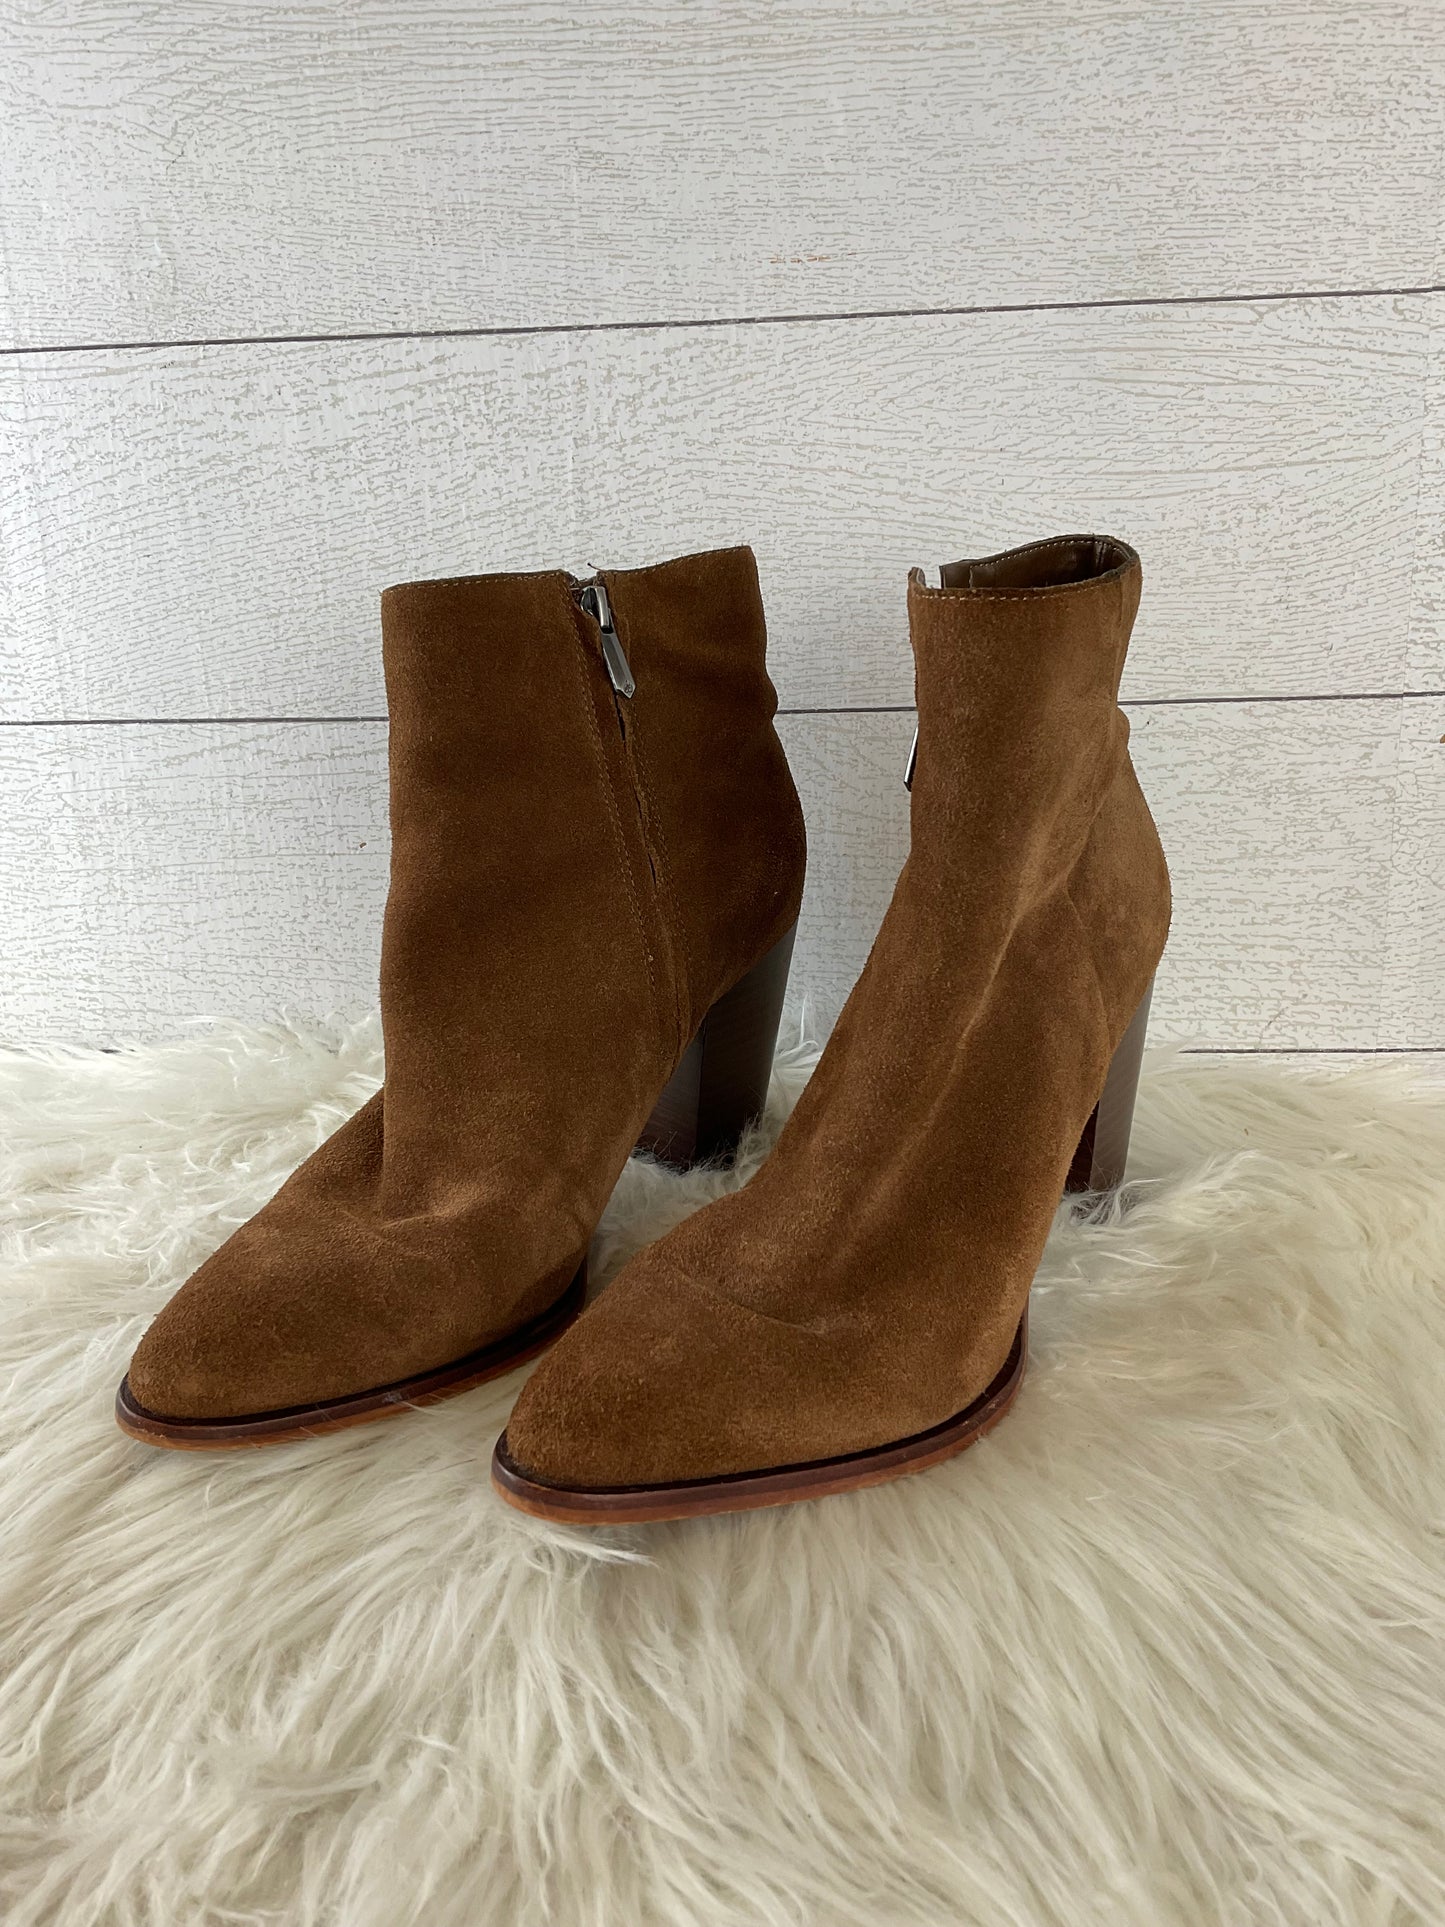 Boots Ankle Heels By Sam Edelman  Size: 9.5